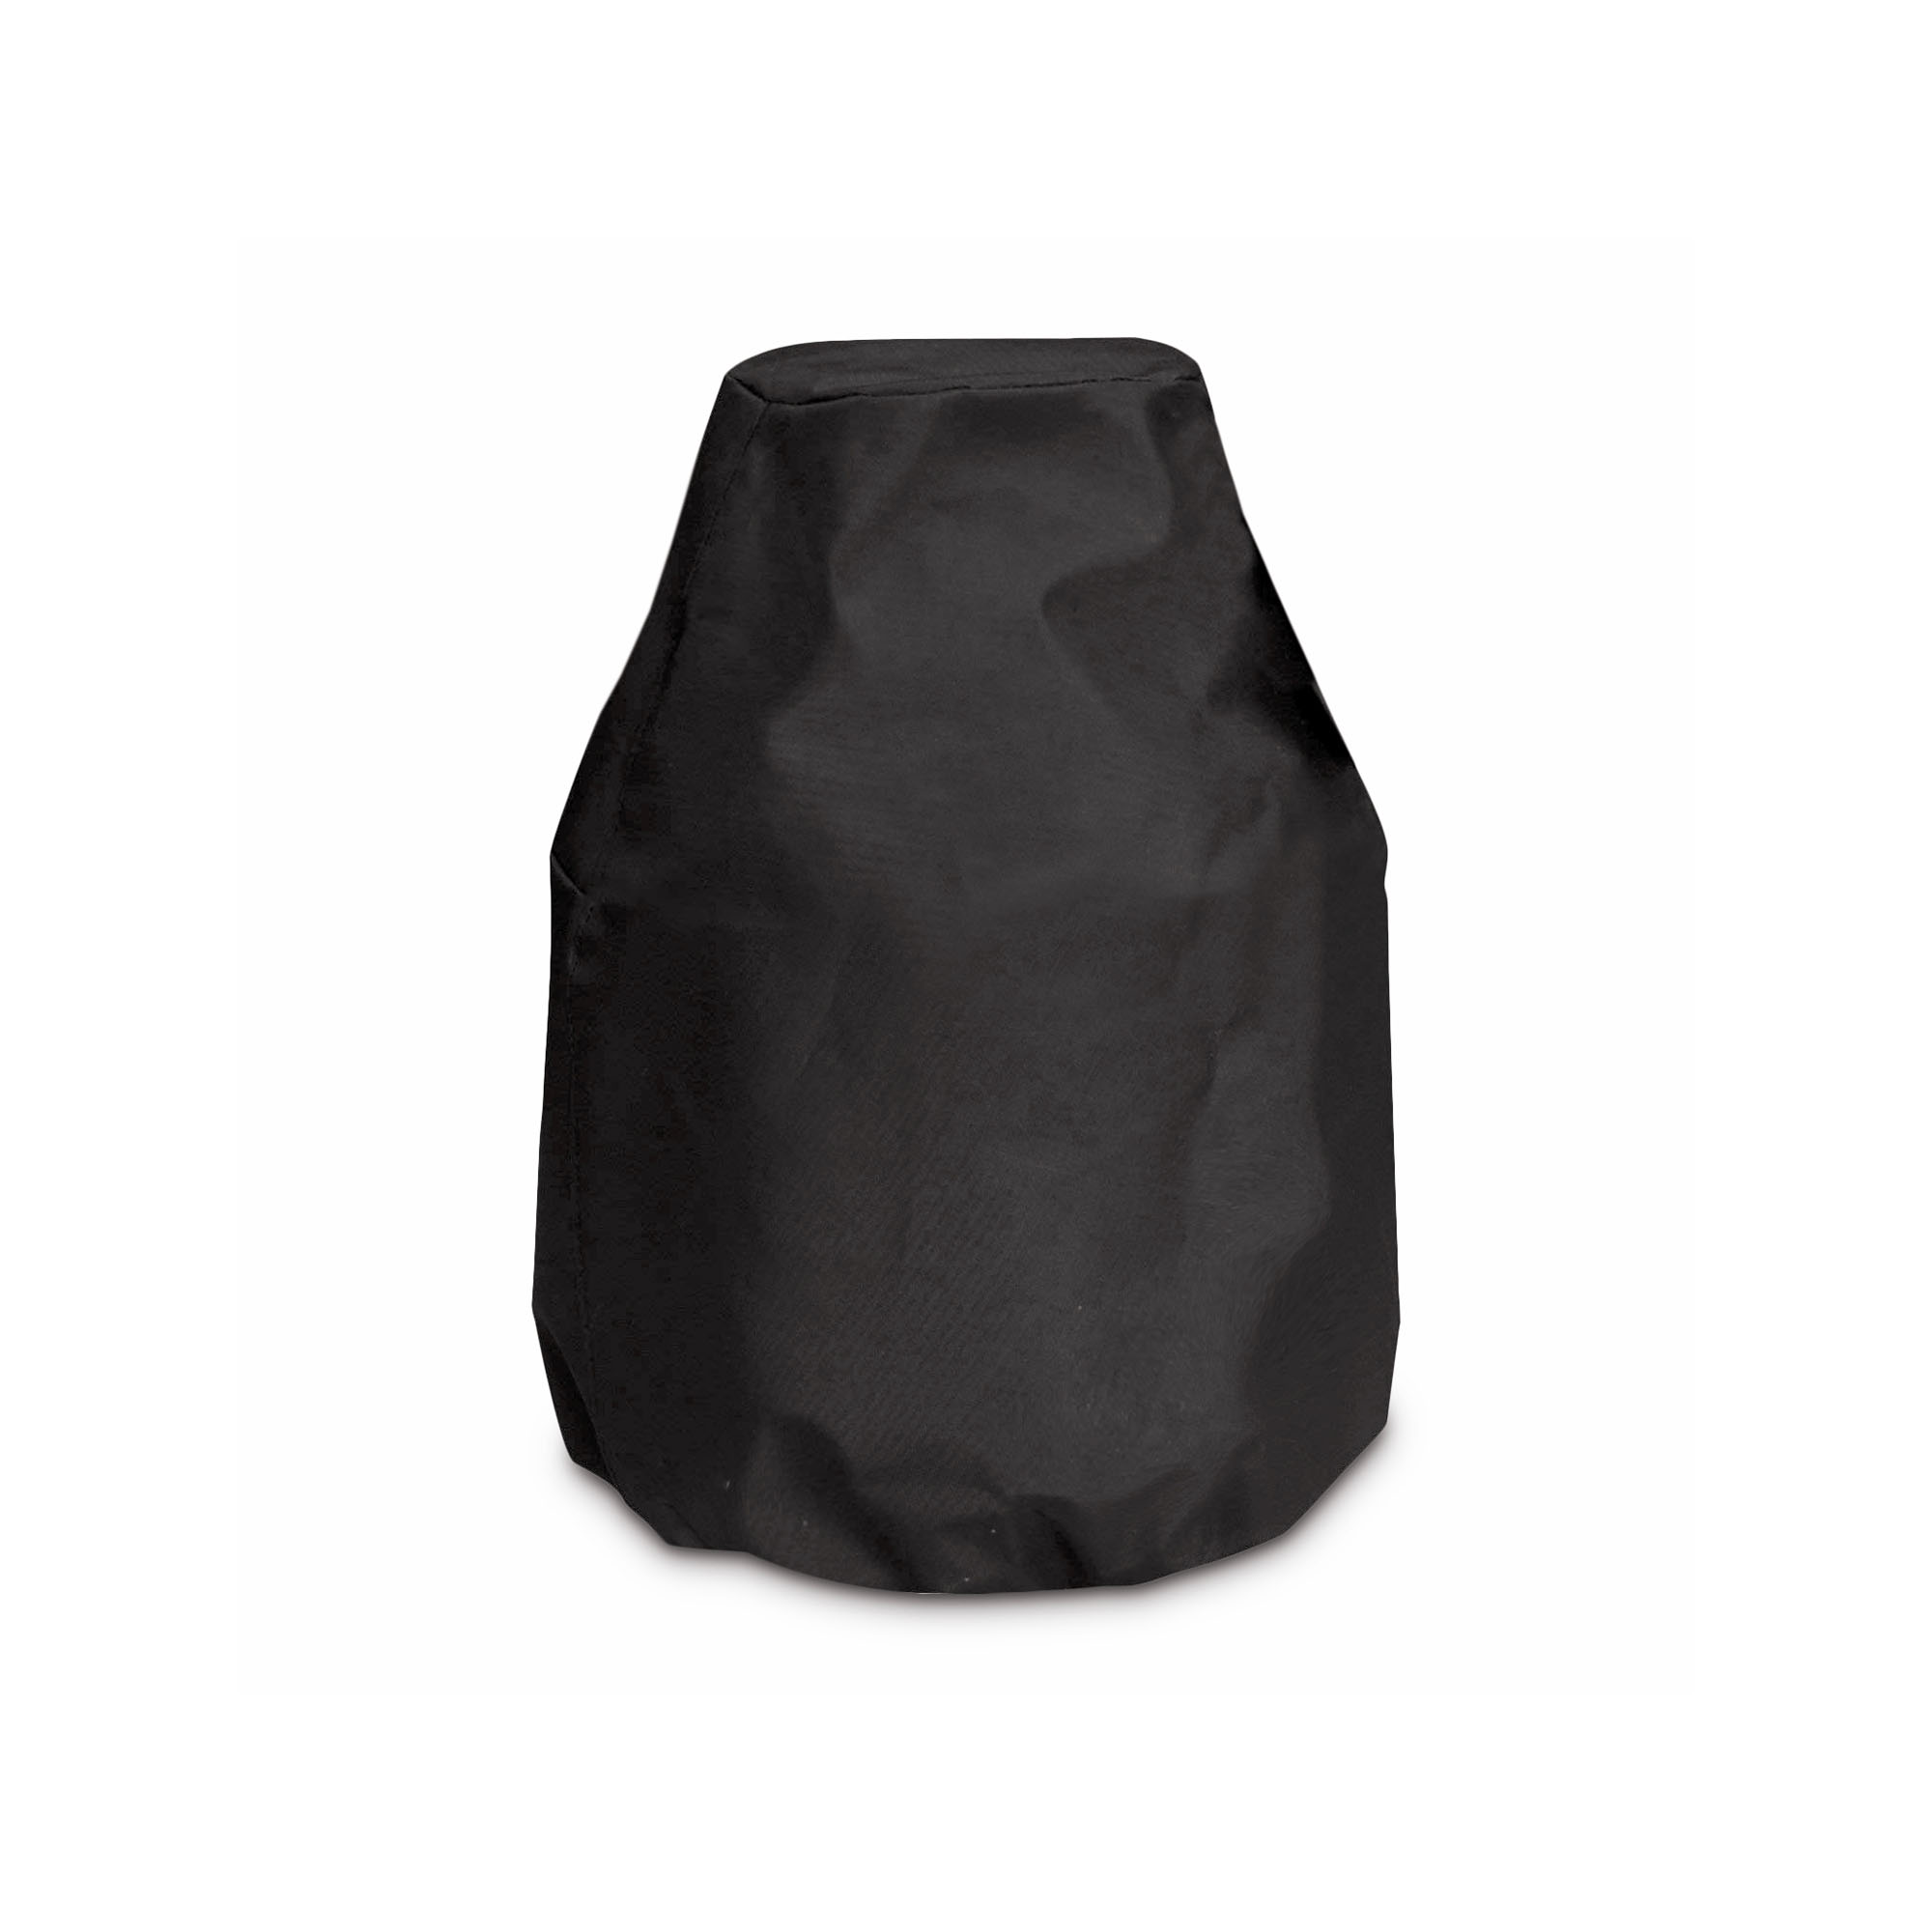 Black Canvas Propane Tank Cover From The Outdoor Plus